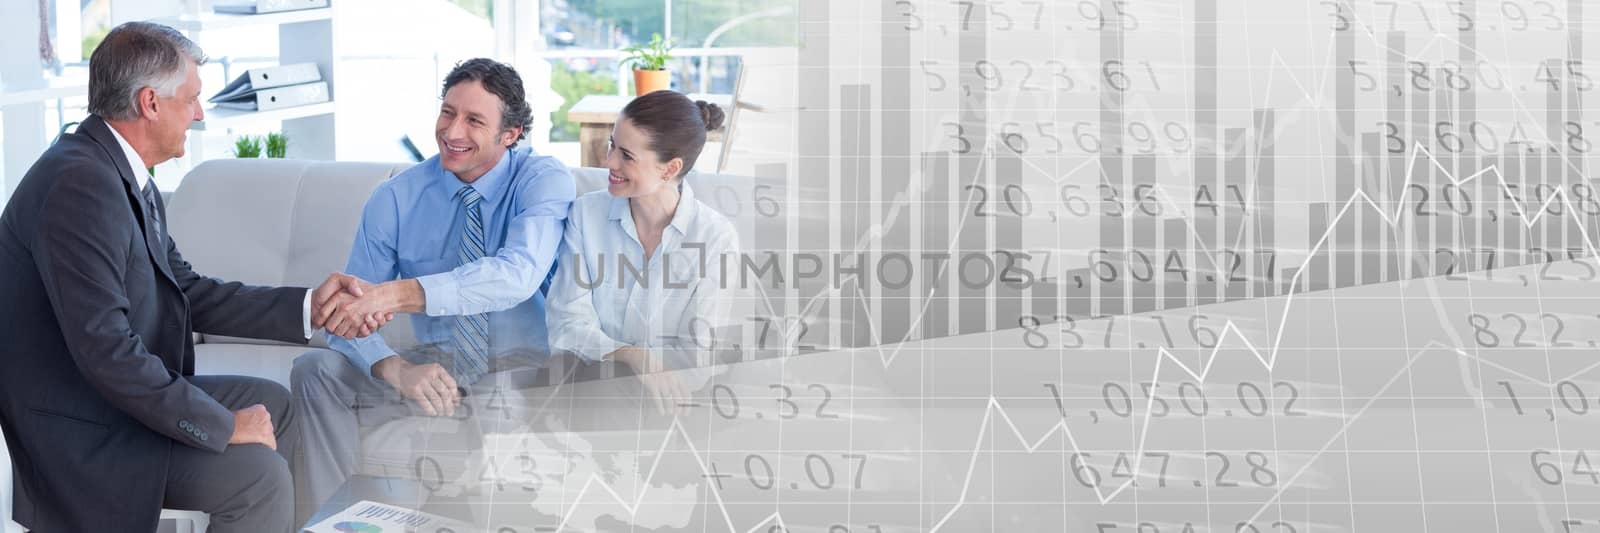 Digital composite of Business people having a meeting with financial figures transition effect